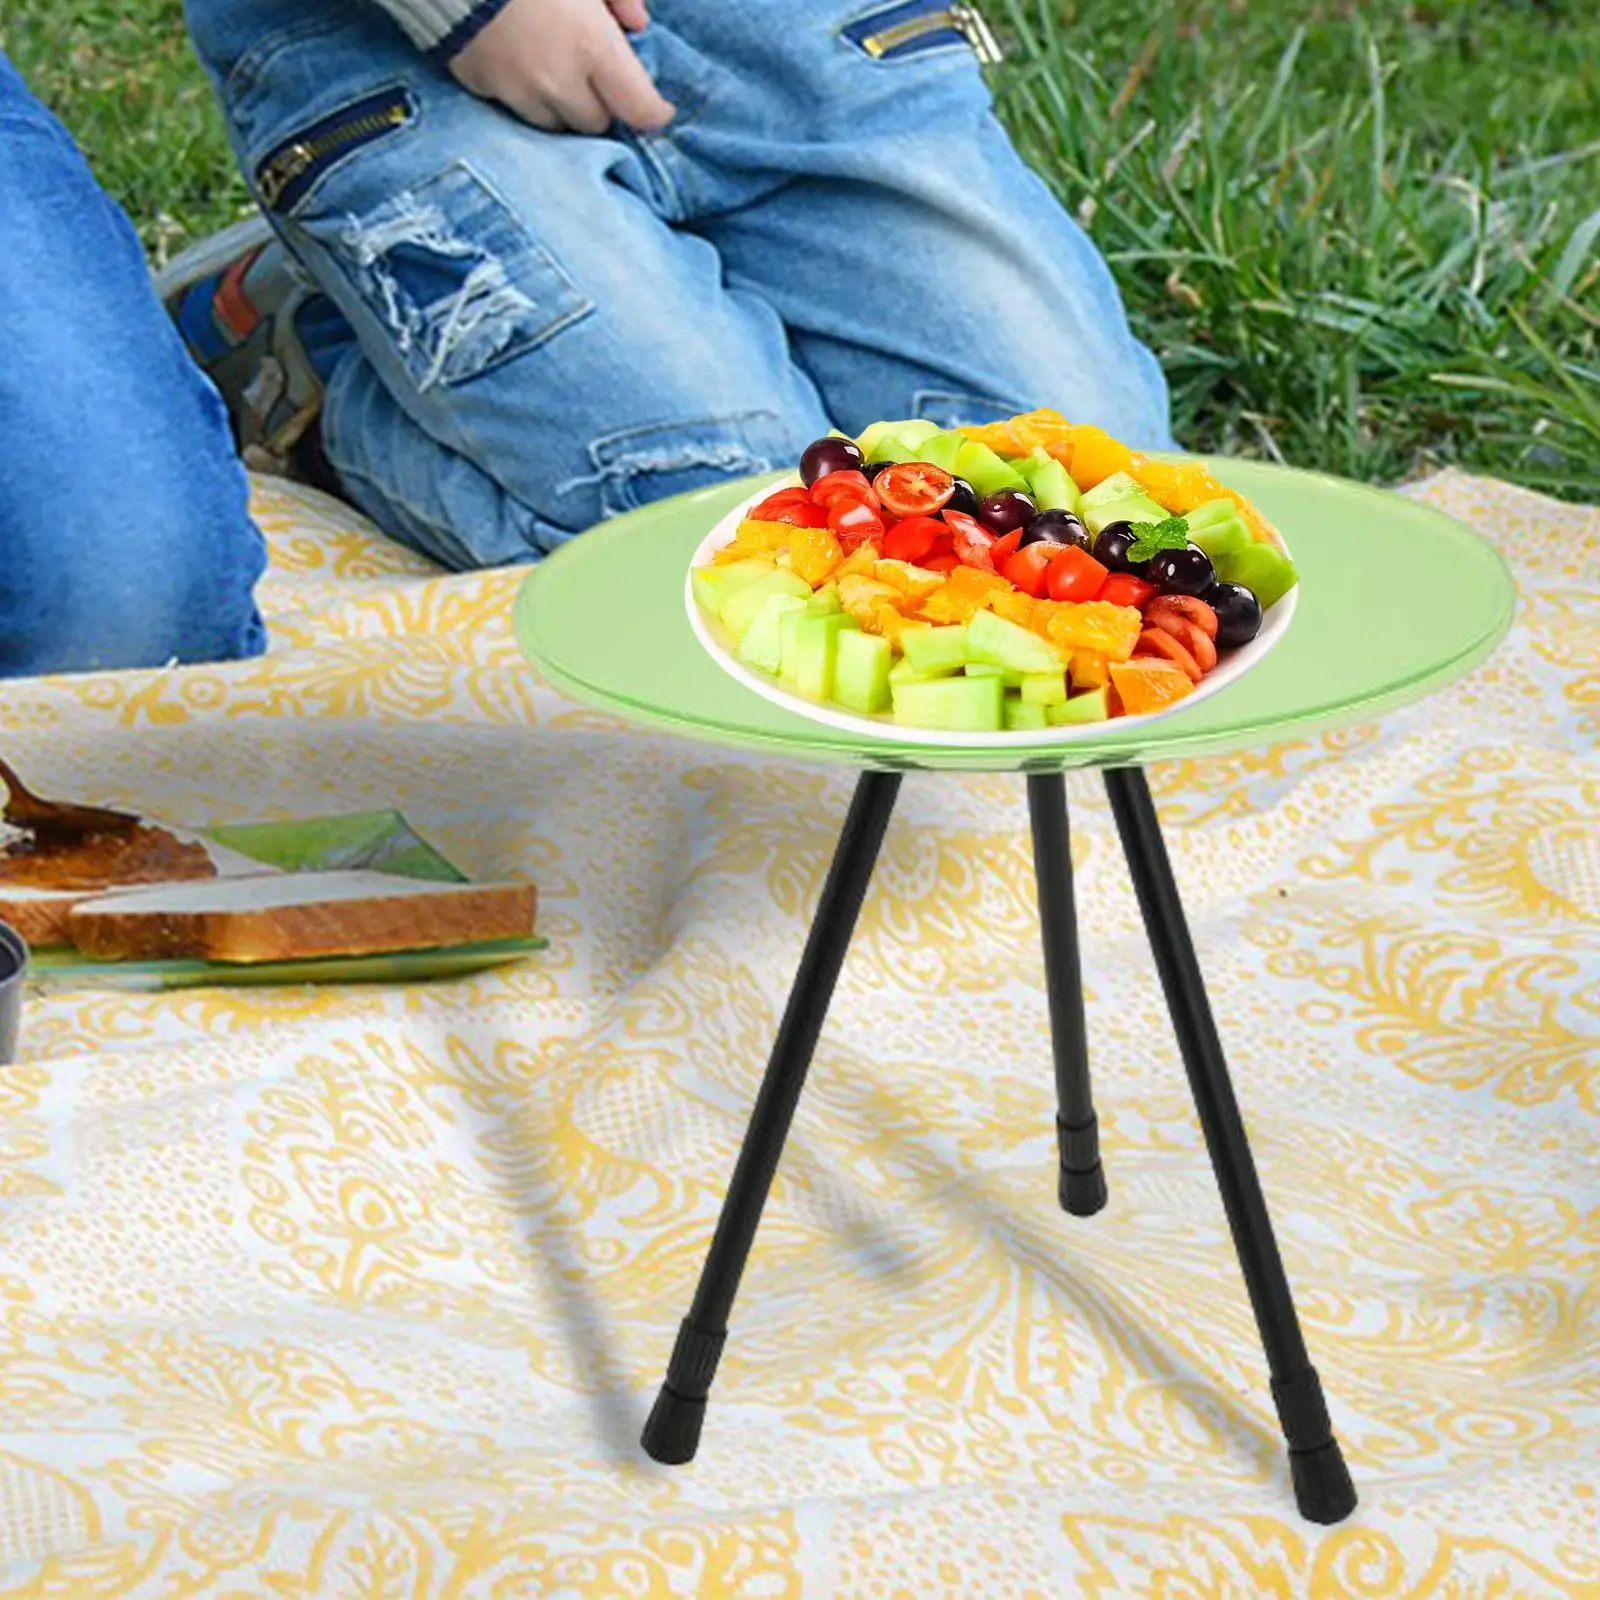 Three Legged Round Table Foldable Stable Outdoor Durable Adjustable Telescopic Lift Dining Desk for Garden Hiking Picnic Fishing